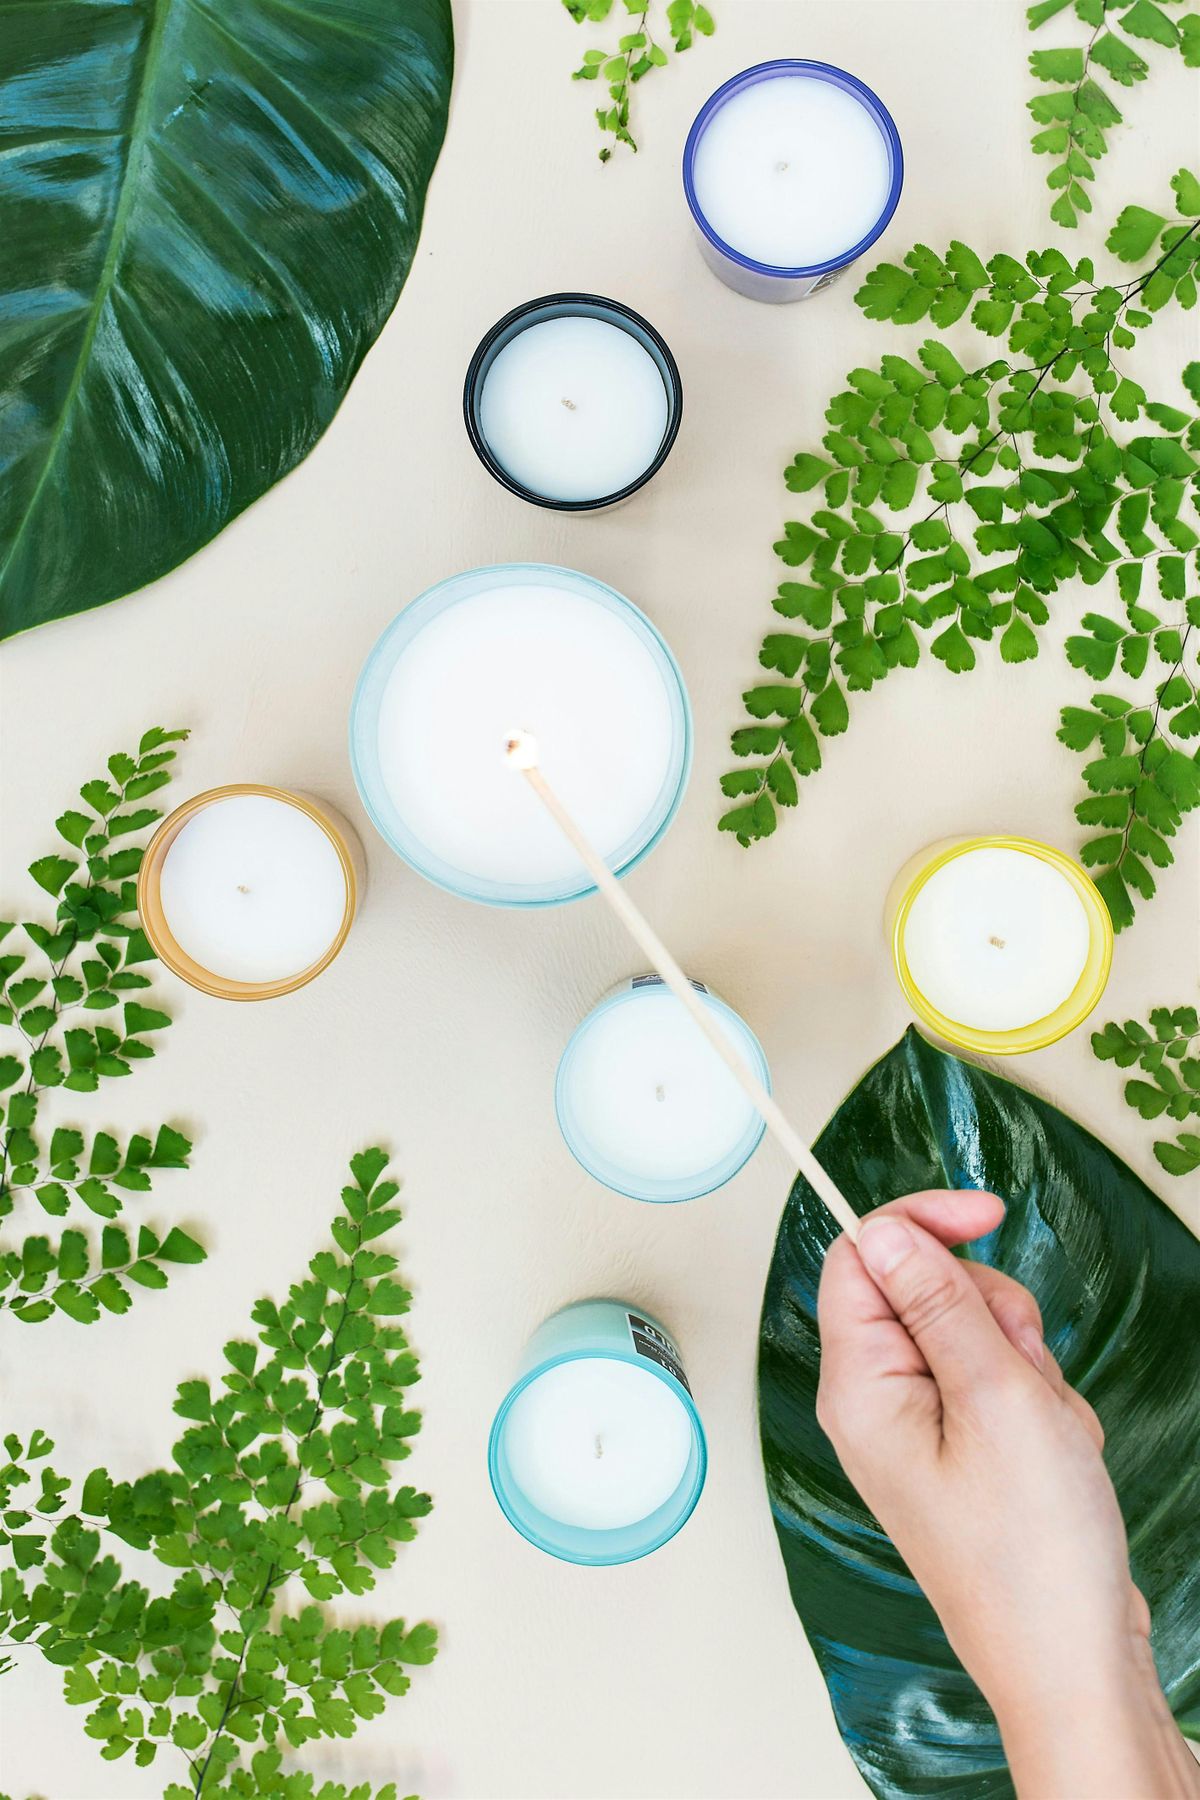 Create a sustainable glow, with our B Corp candle making workshop!